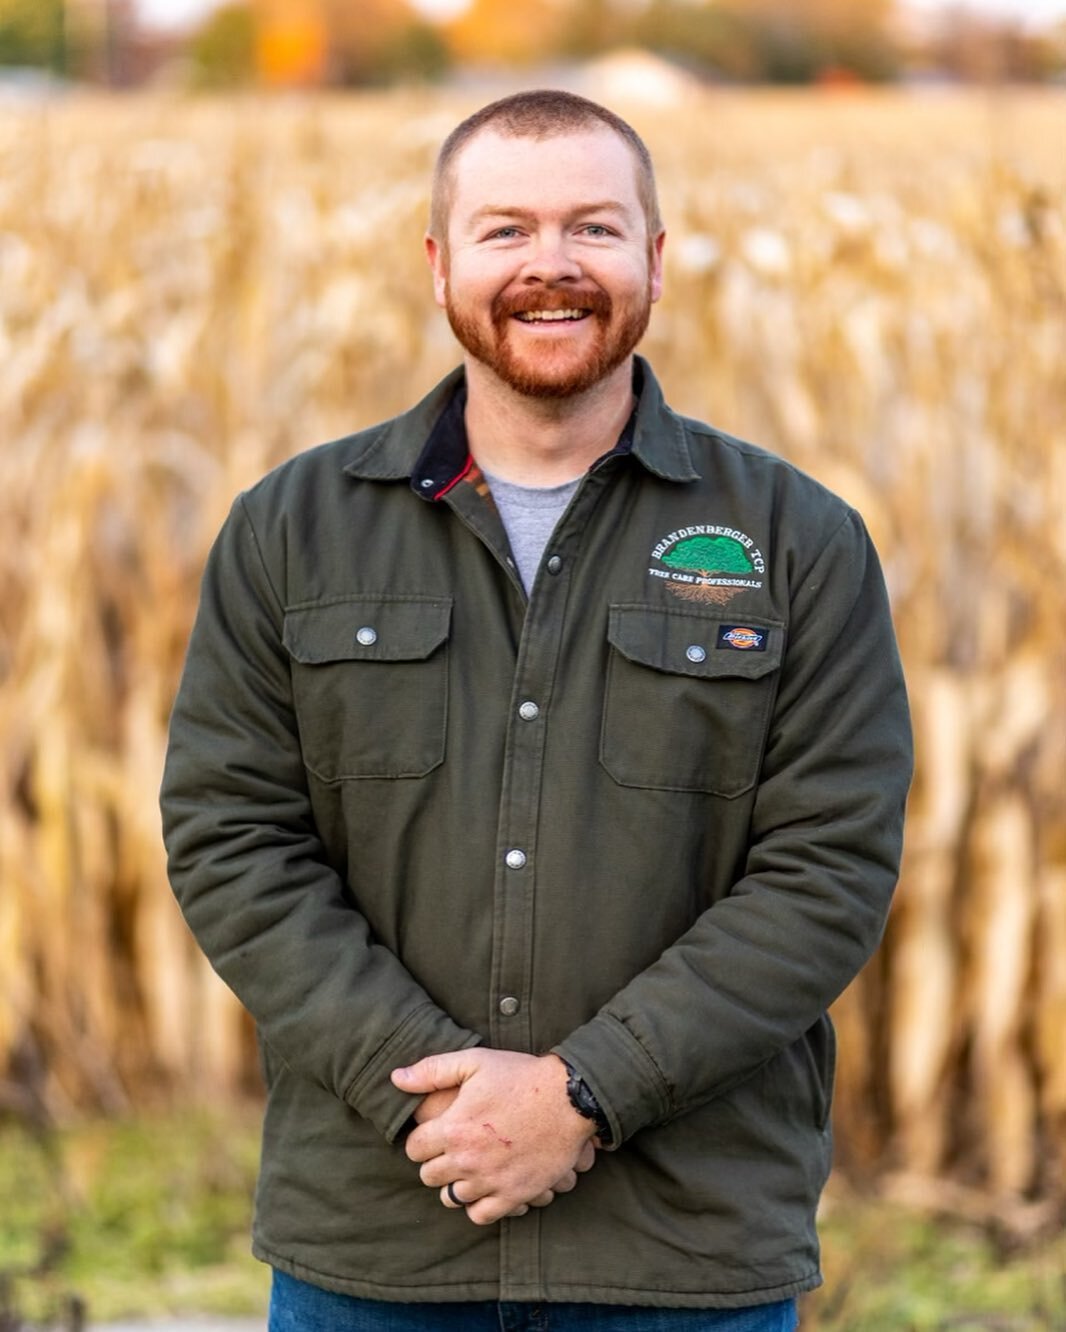 MEET THE TEAM: Joe Bastian

Joe is our Customer Relations Specialist and Plant Health Care Technician and has been with our team since 2018. He has been a 3A Certified Pesticide Applicator since 2019.&nbsp;&nbsp;Check out our story highlight for more